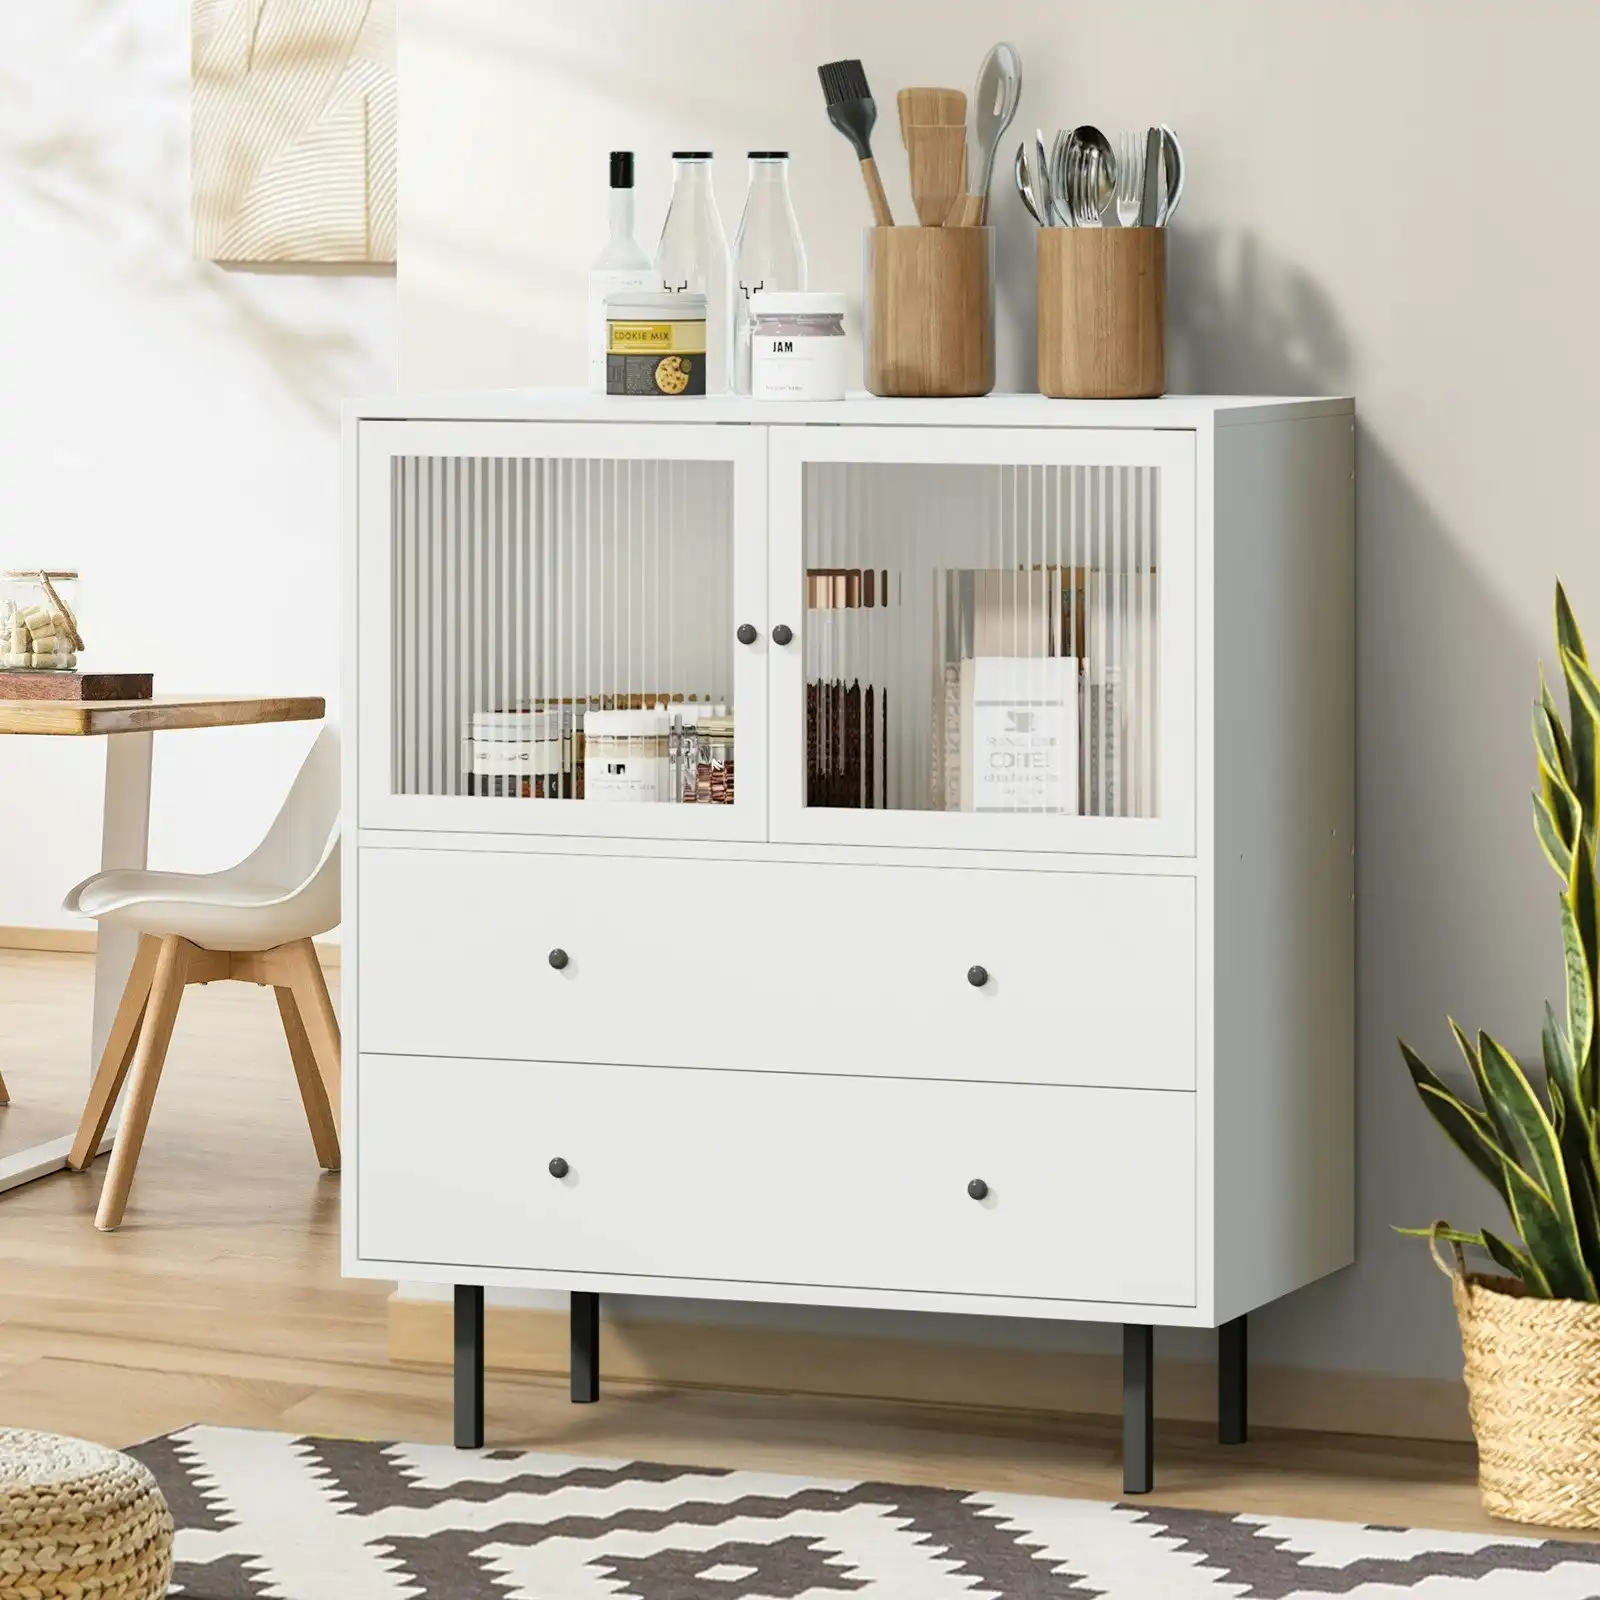 Oikiture Sideboard Buffet Storage Cabinet Tempered Glass Door 2 Drawers White